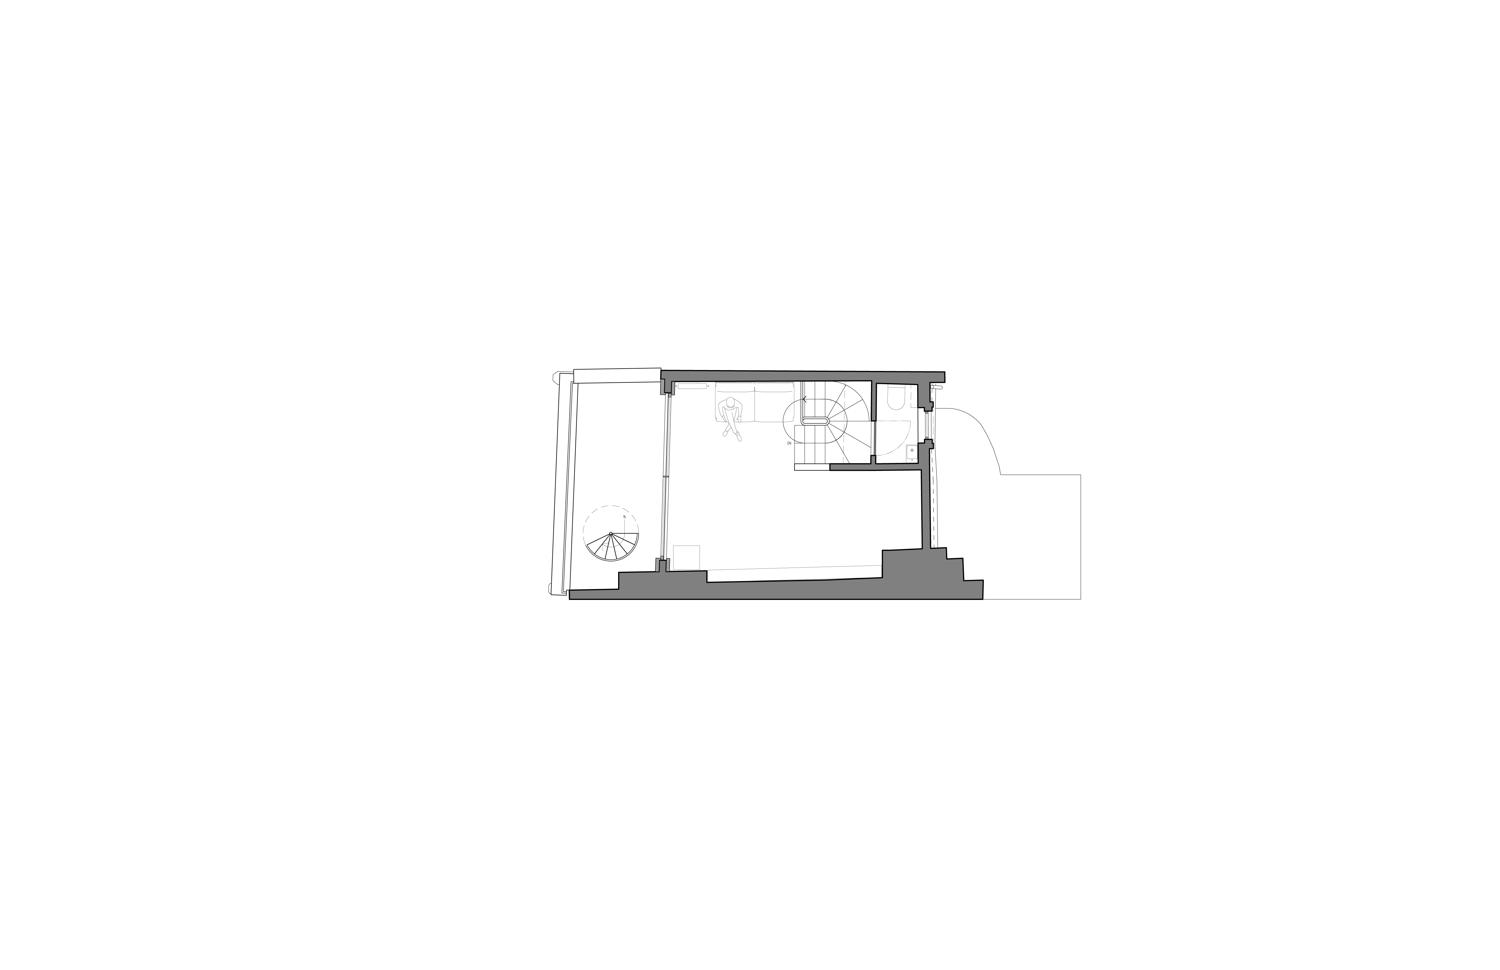 Fourth floor plan, courtesy of Architensions